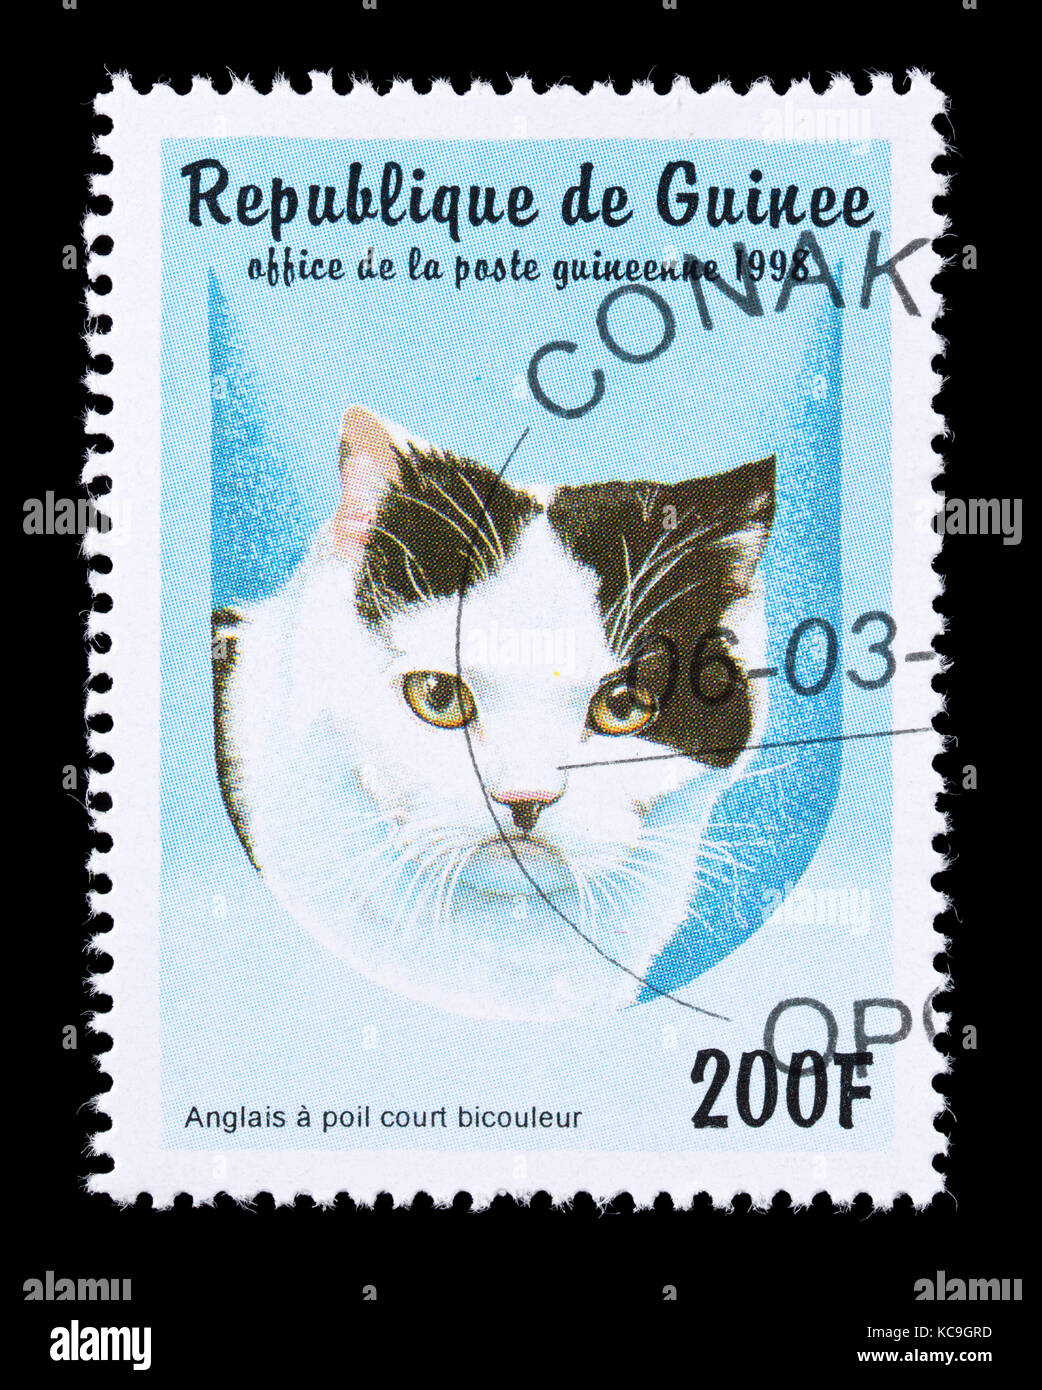 Postage stamp from Guinea depicting an english shorthair bicolor breed of cat. Stock Photo